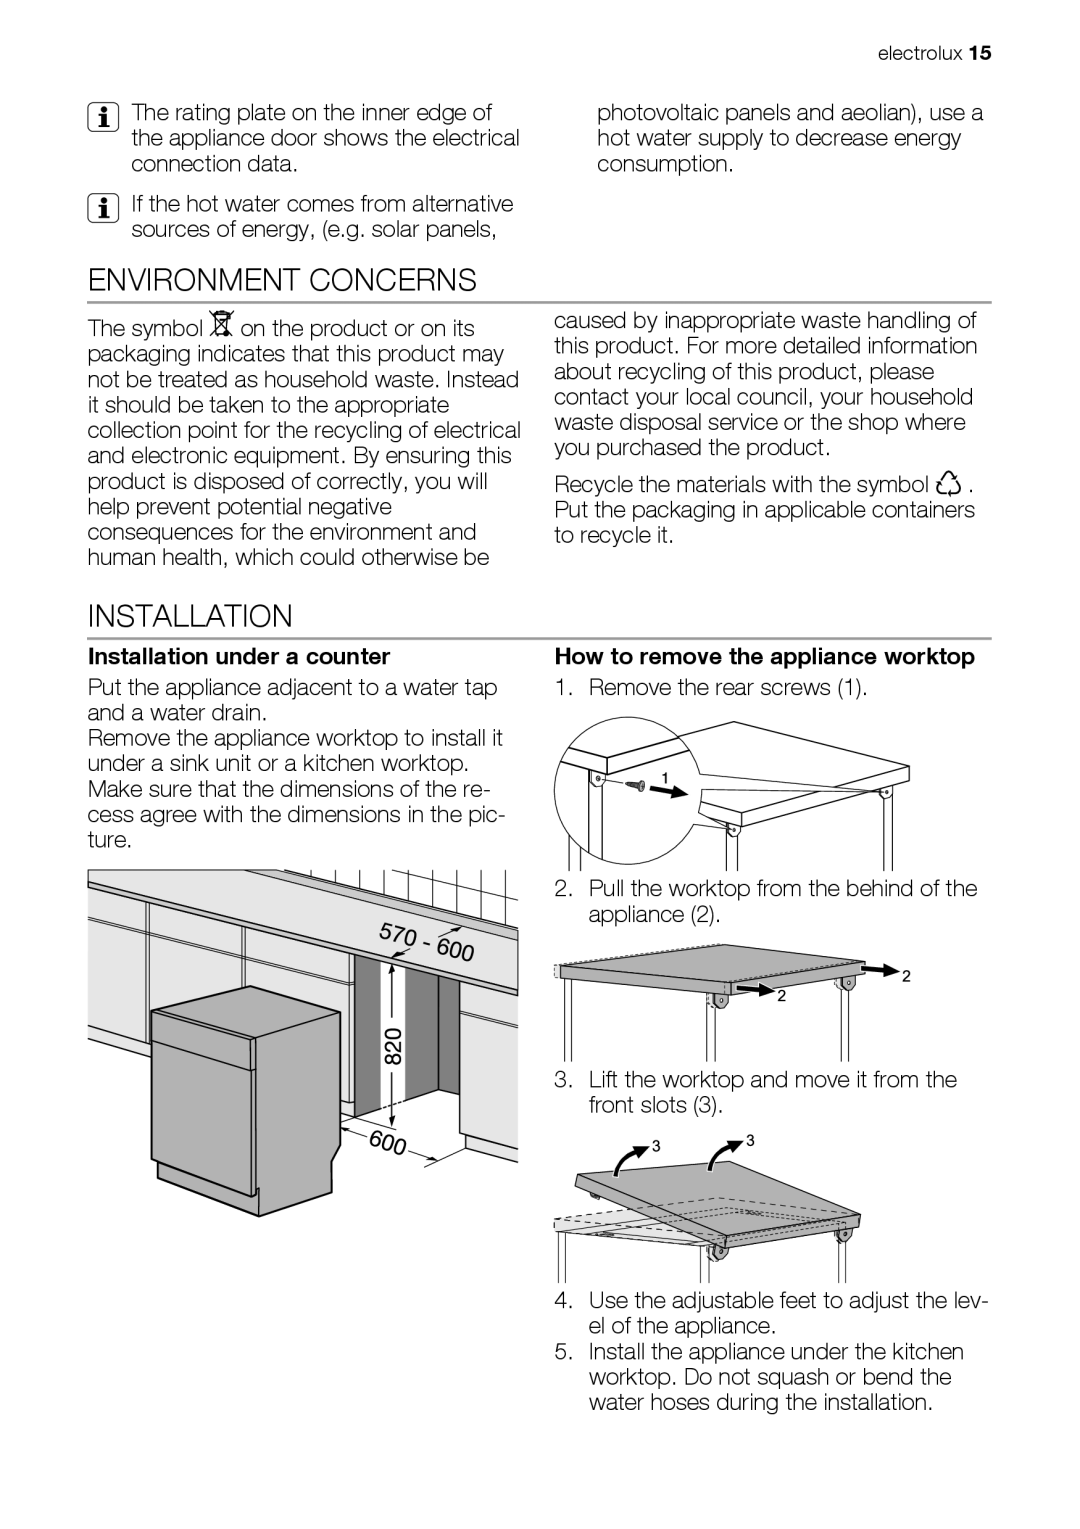 Electrolux ESF63012 user manual Environment Concerns, Installation under a counter, How to remove the appliance worktop 